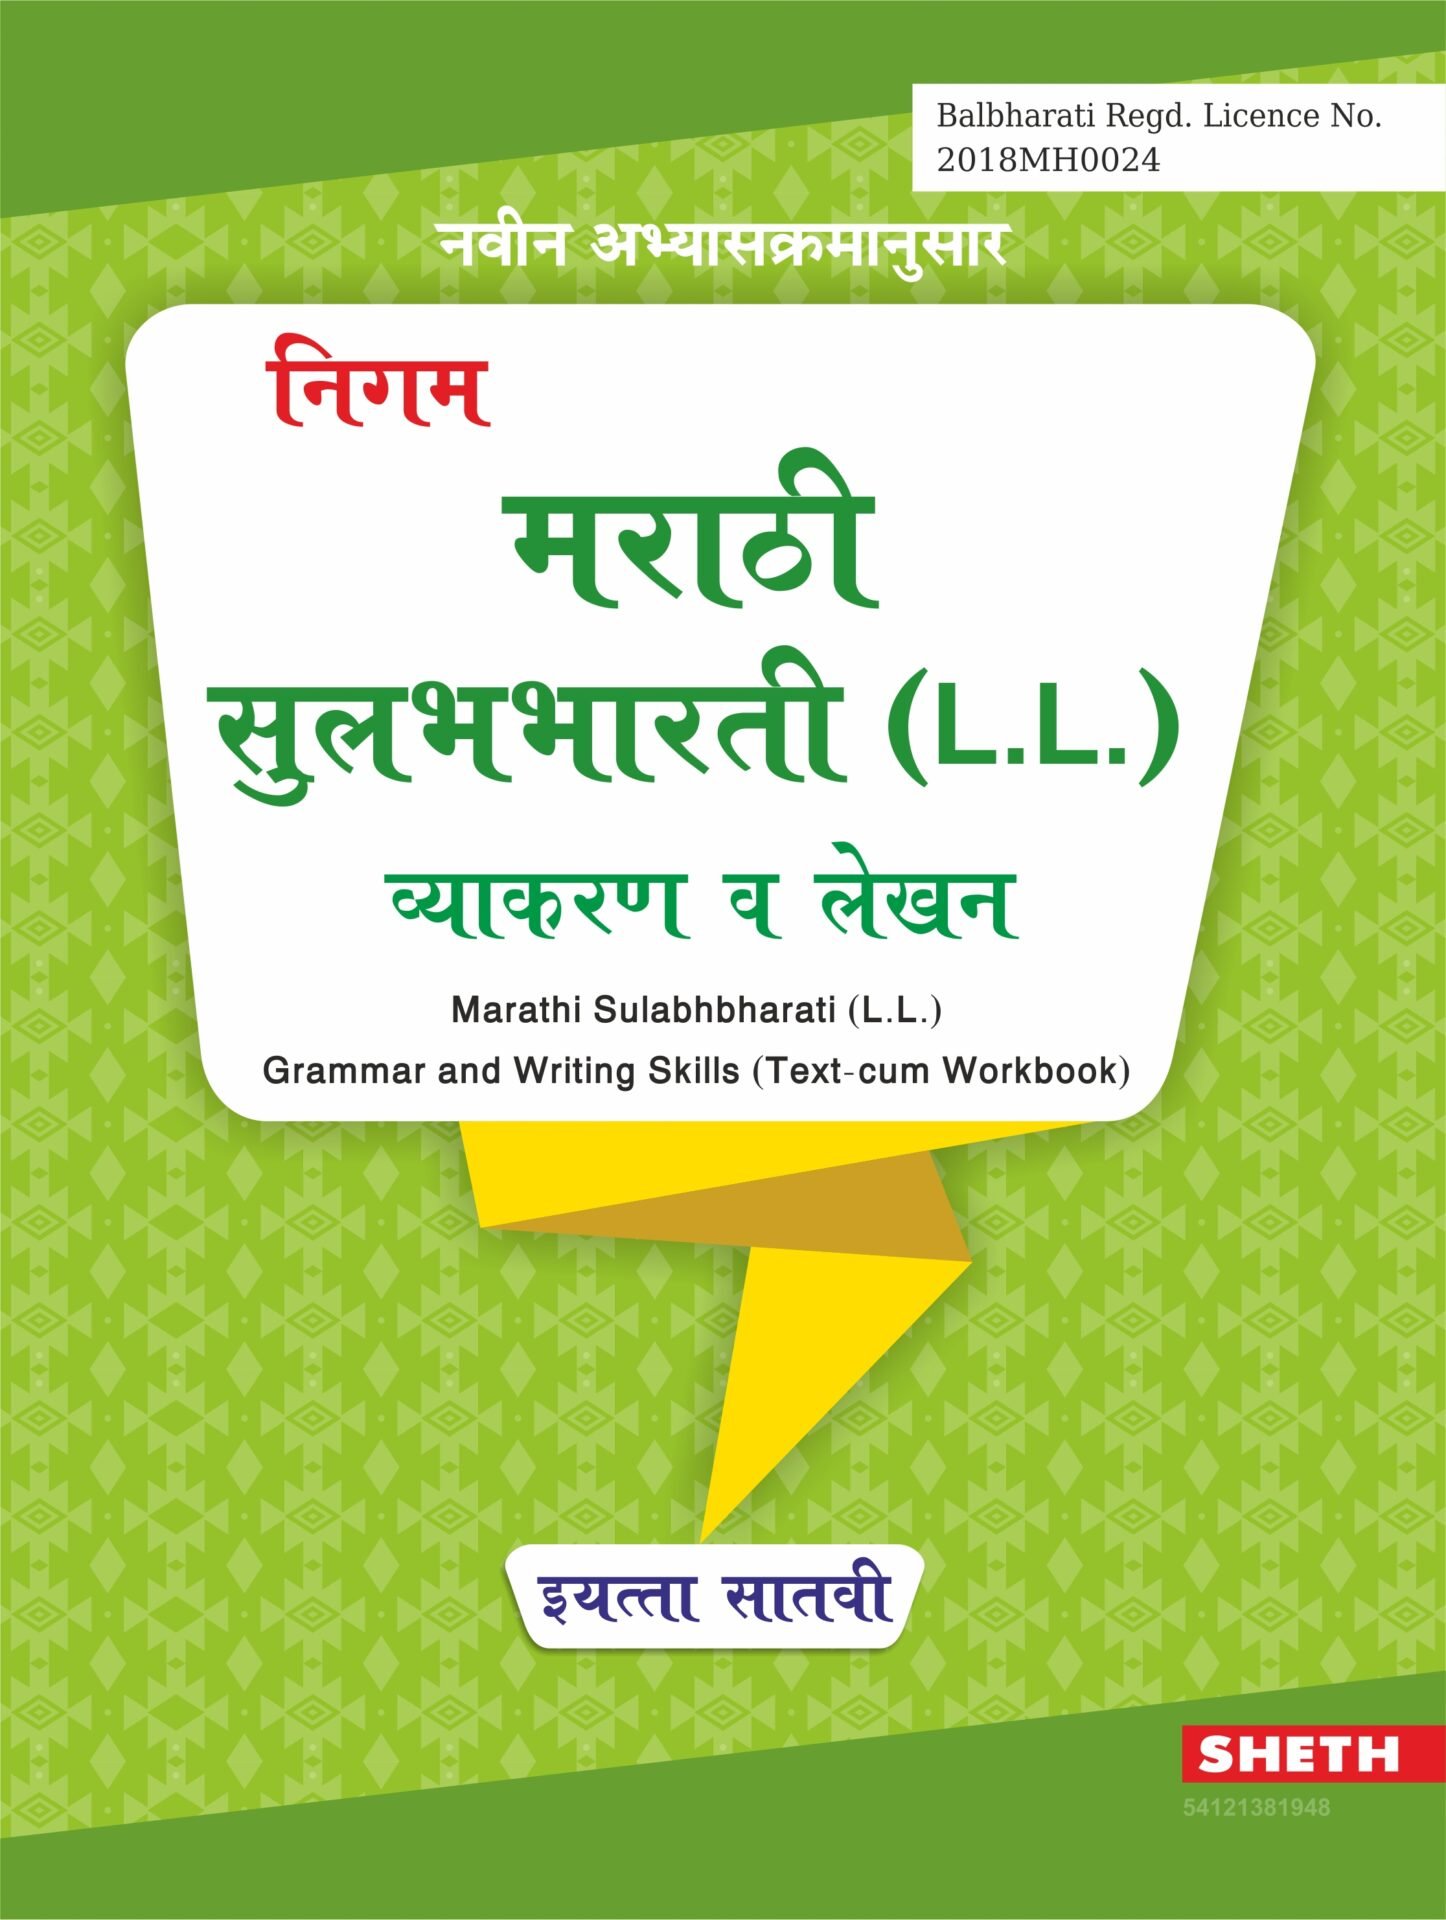 marathi-grammar-book-for-class-7-shethbooks-official-buy-page-of-sheth-publishing-house